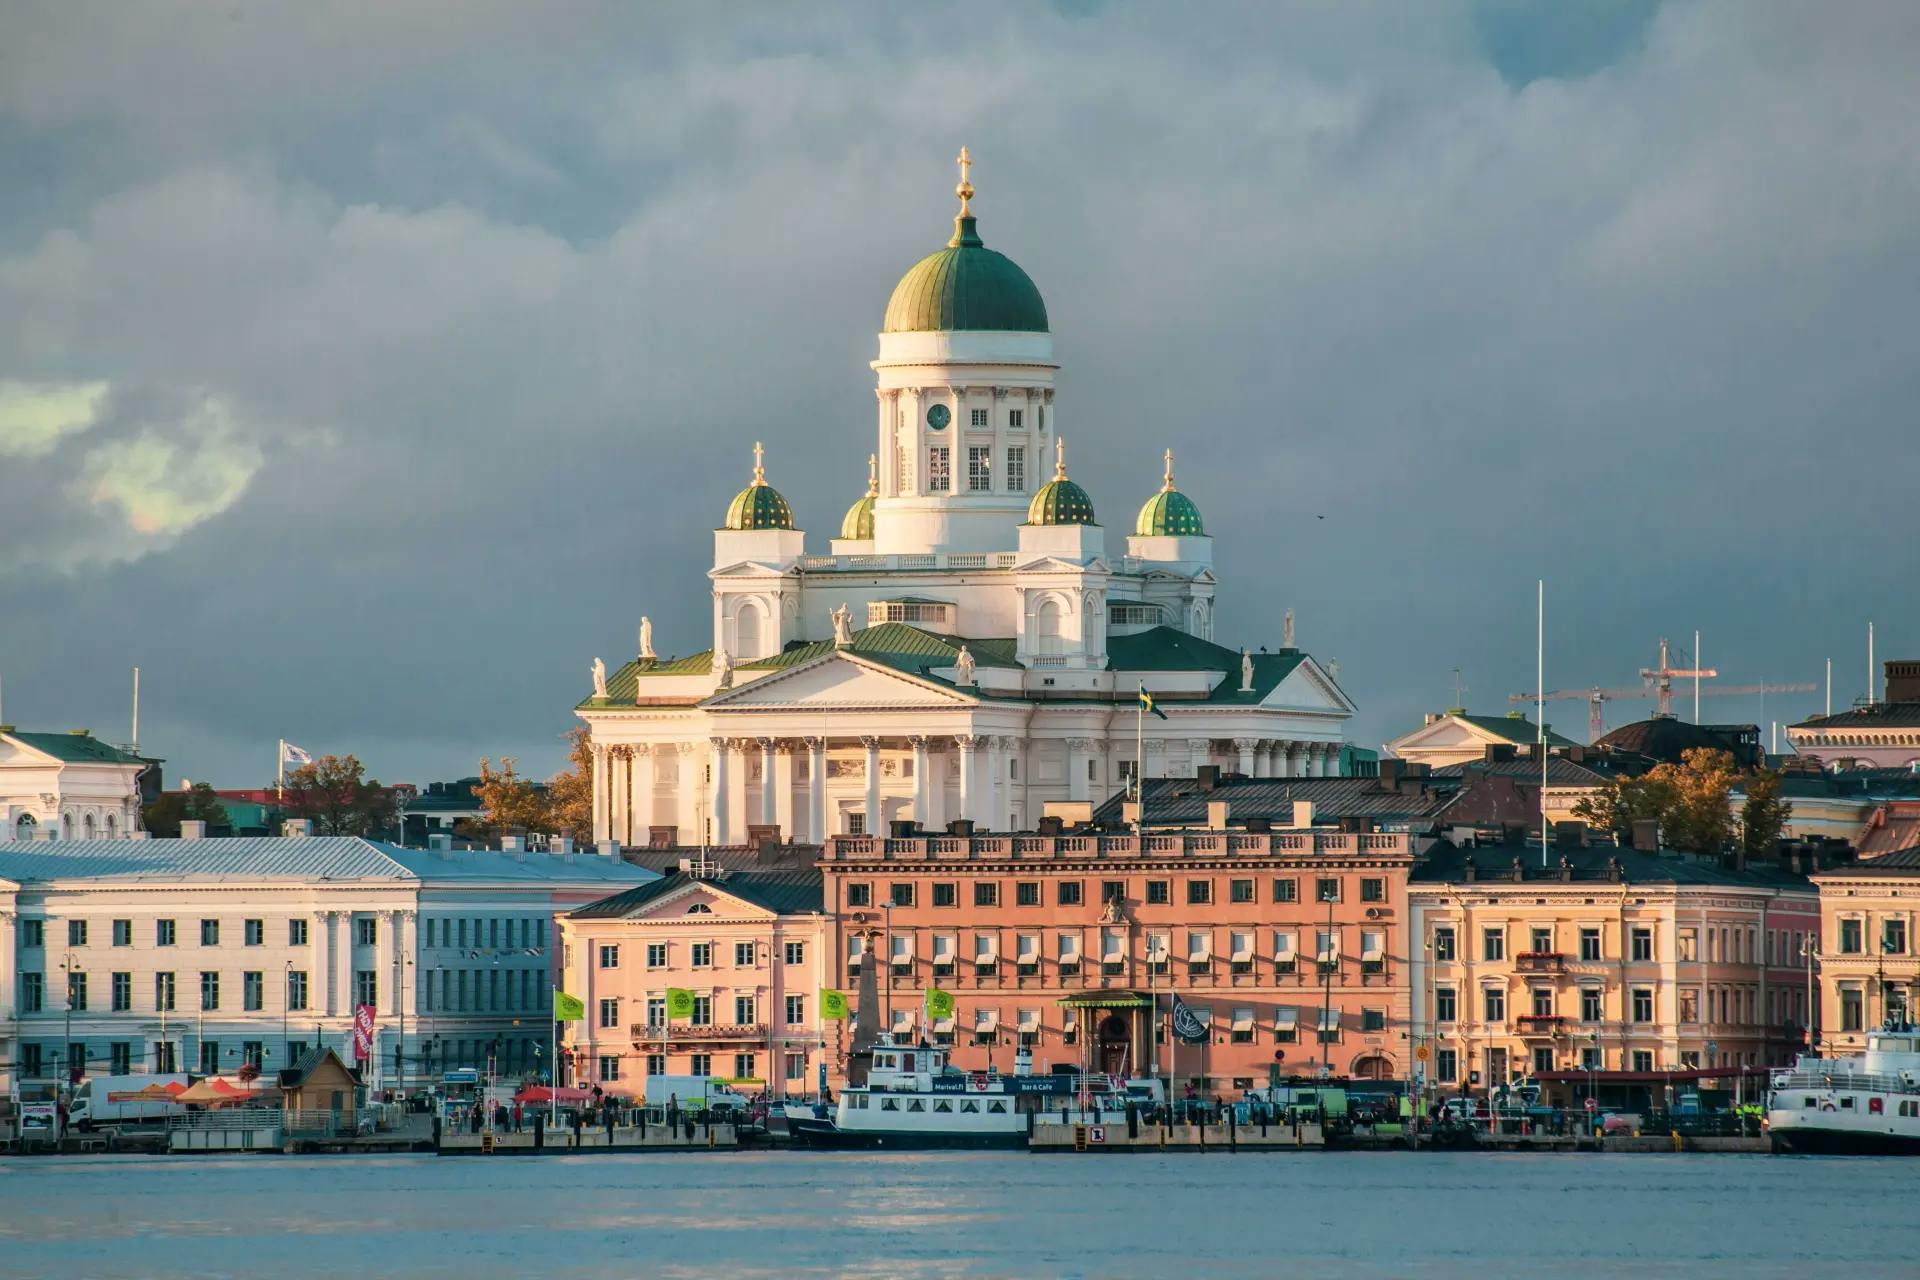 An image of Helsinki cathedral in Finland